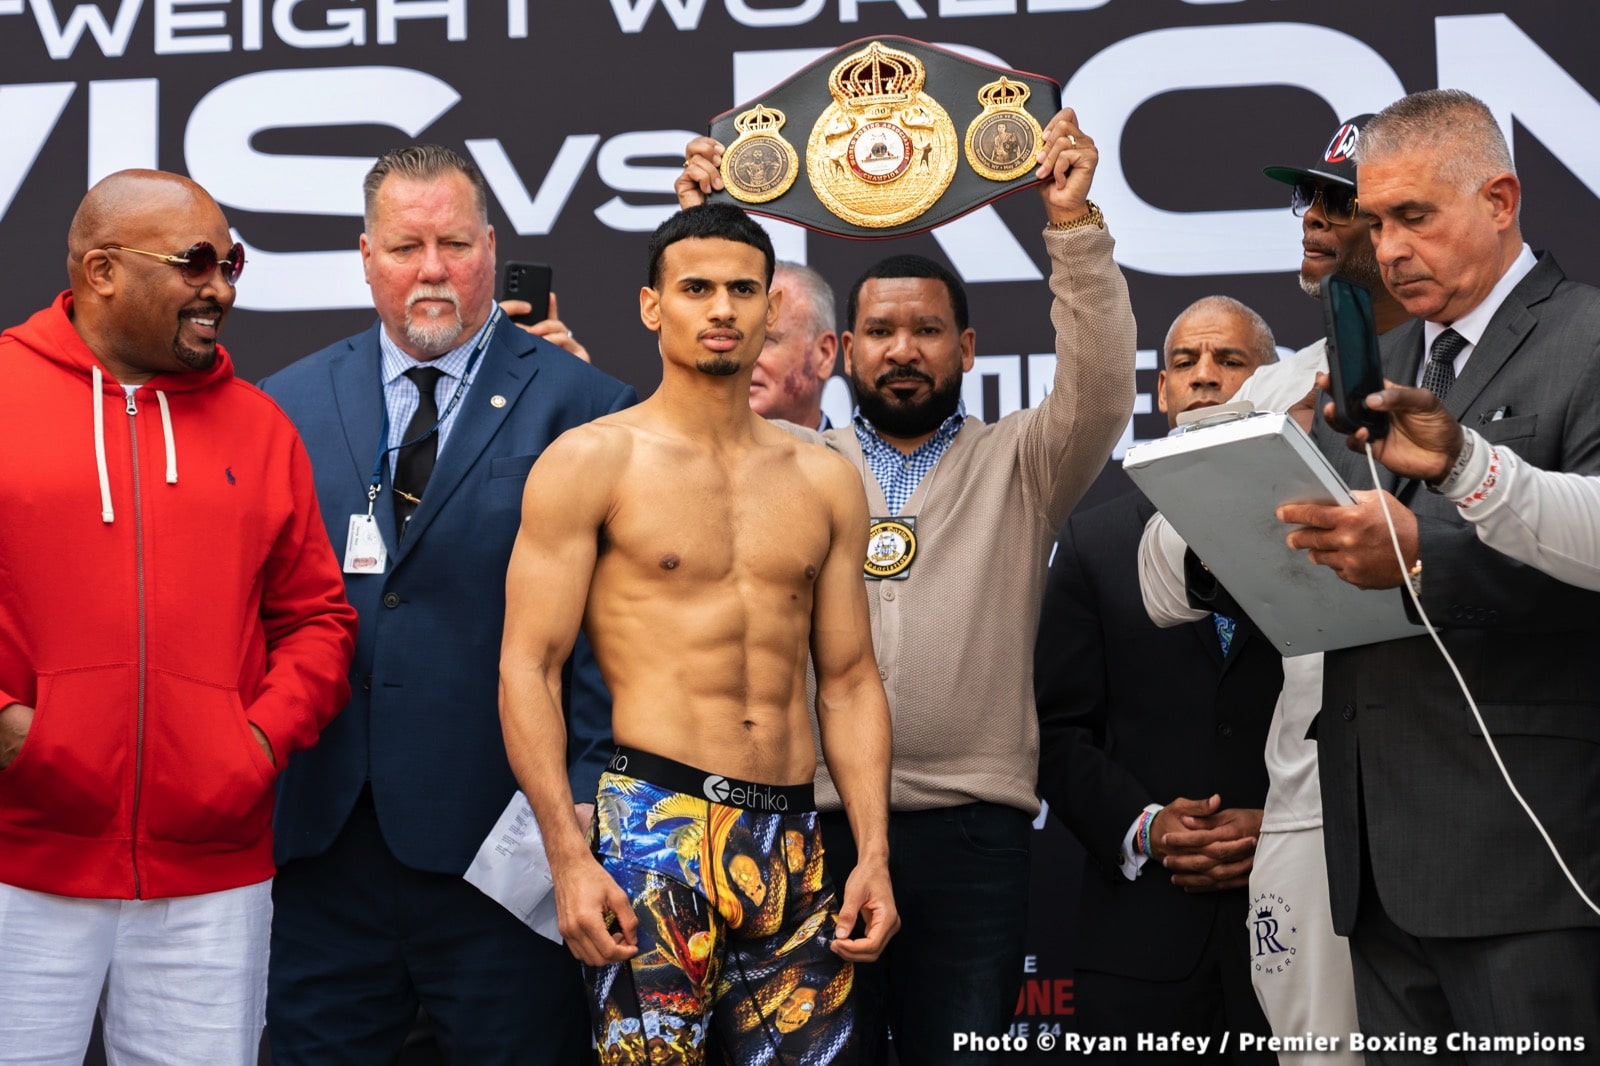 Image: Gervonta Davis 133.75 vs. Rolly Romero 134.25 - Weigh-in results